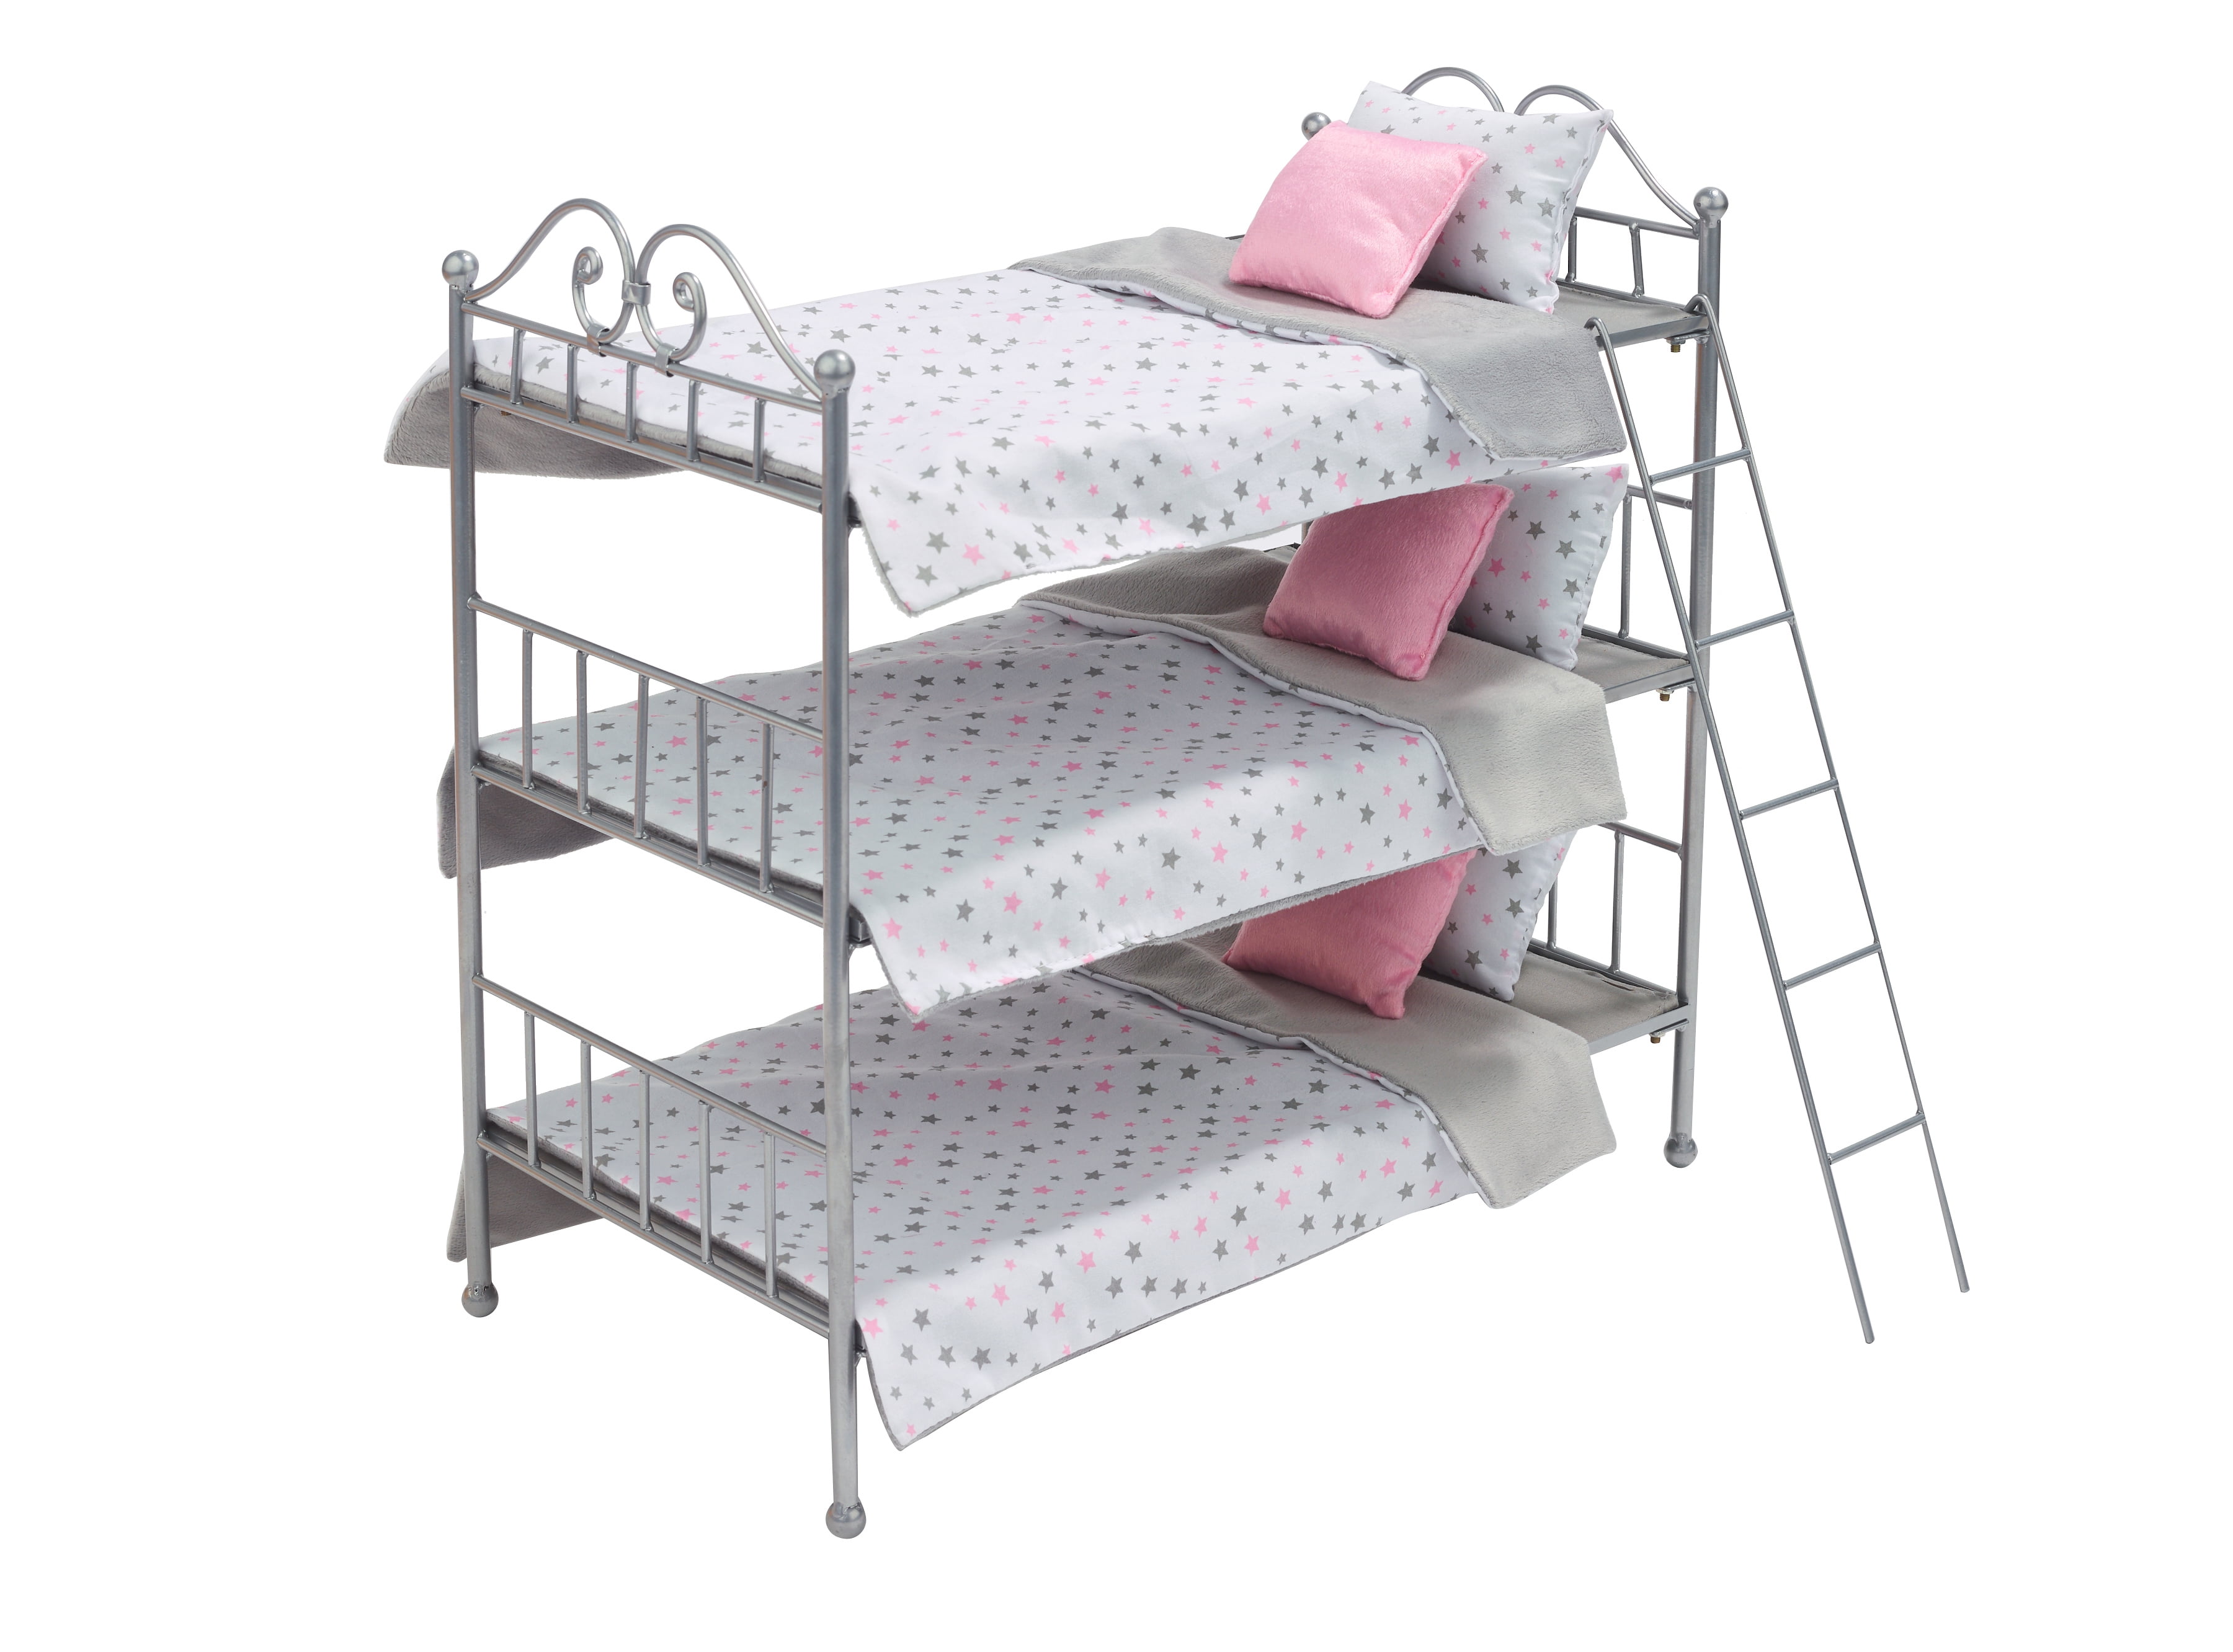 Triple Baby Bunk Beds Toys Multi Color Durable Plastic Dollhouses Play Sets New 